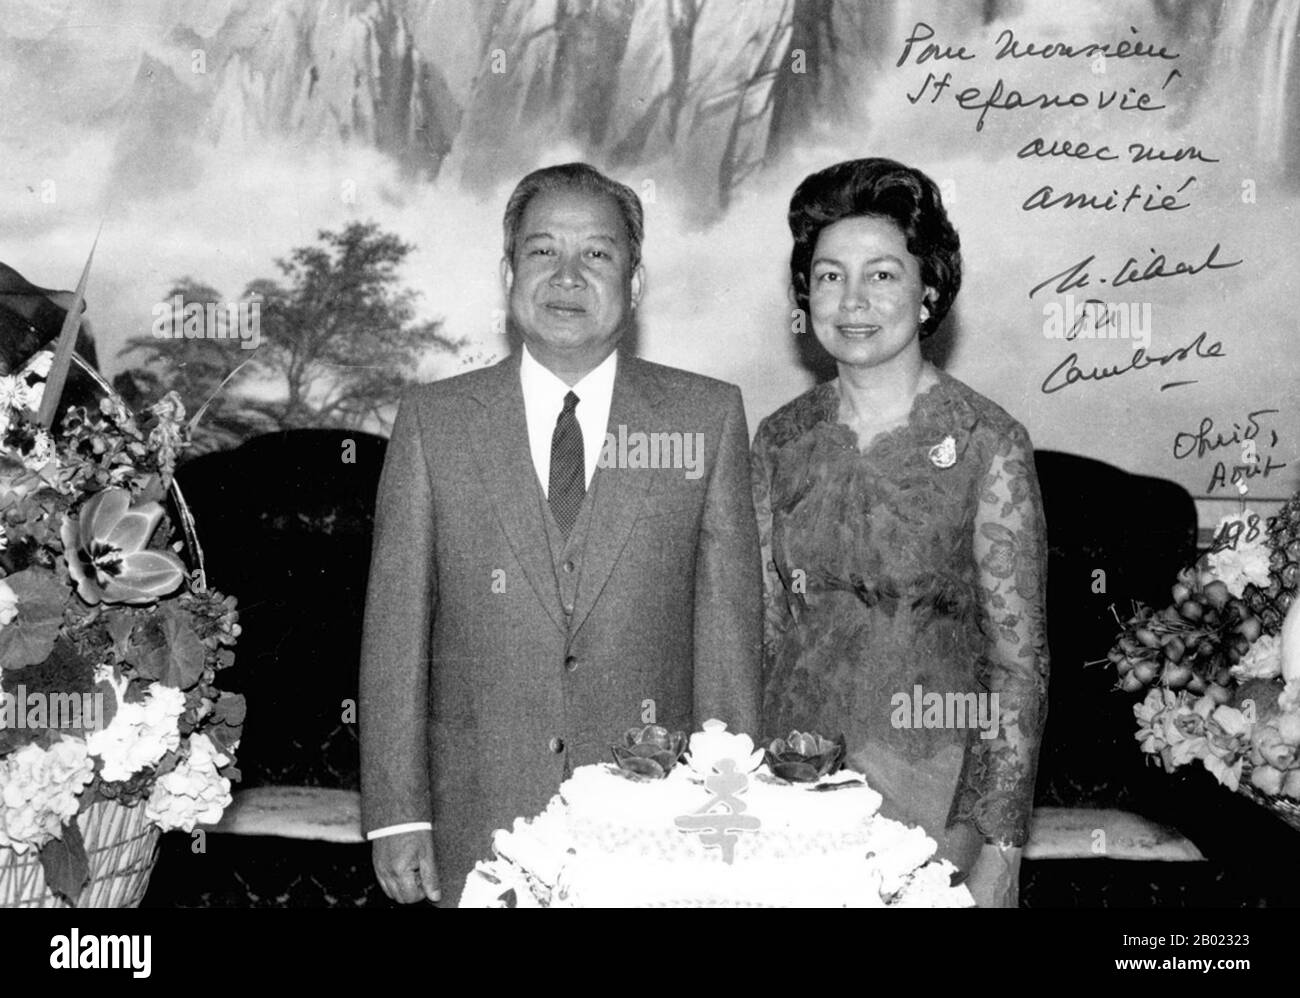 Norodom Sihanouk (born 31 October 1922) was the King of Cambodia from 1941 to 1955 and again from 1993 until his retirement and voluntary abdication on 7 October 2004 in favour of his son, the current King Norodom Sihamoni.  Following his abdication he was known as The King-Father of Cambodia, a position in which he retained many of his former responsibilities as constitutional monarch. He died of a heart attack in Beijing, China, on October 15, 2012. Stock Photo